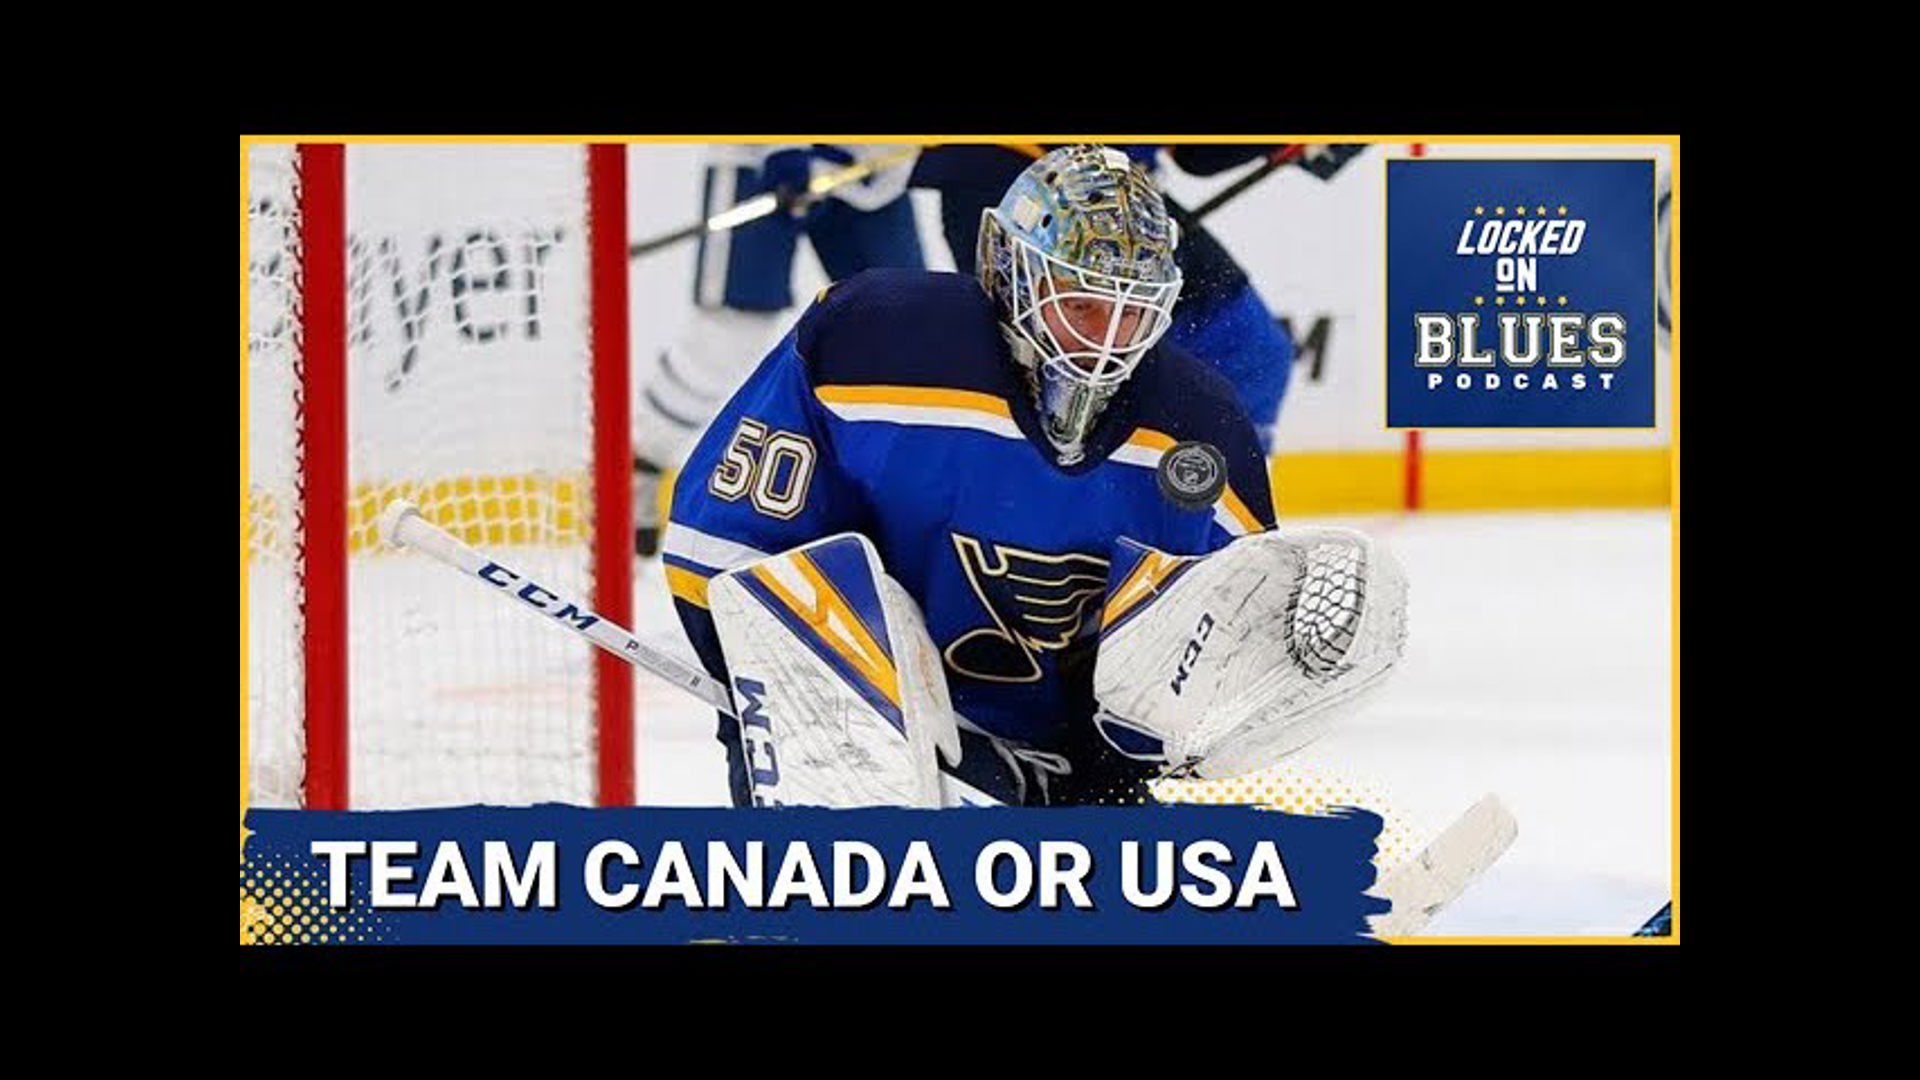 5 Blues Players Were Named To Compete In Worlds